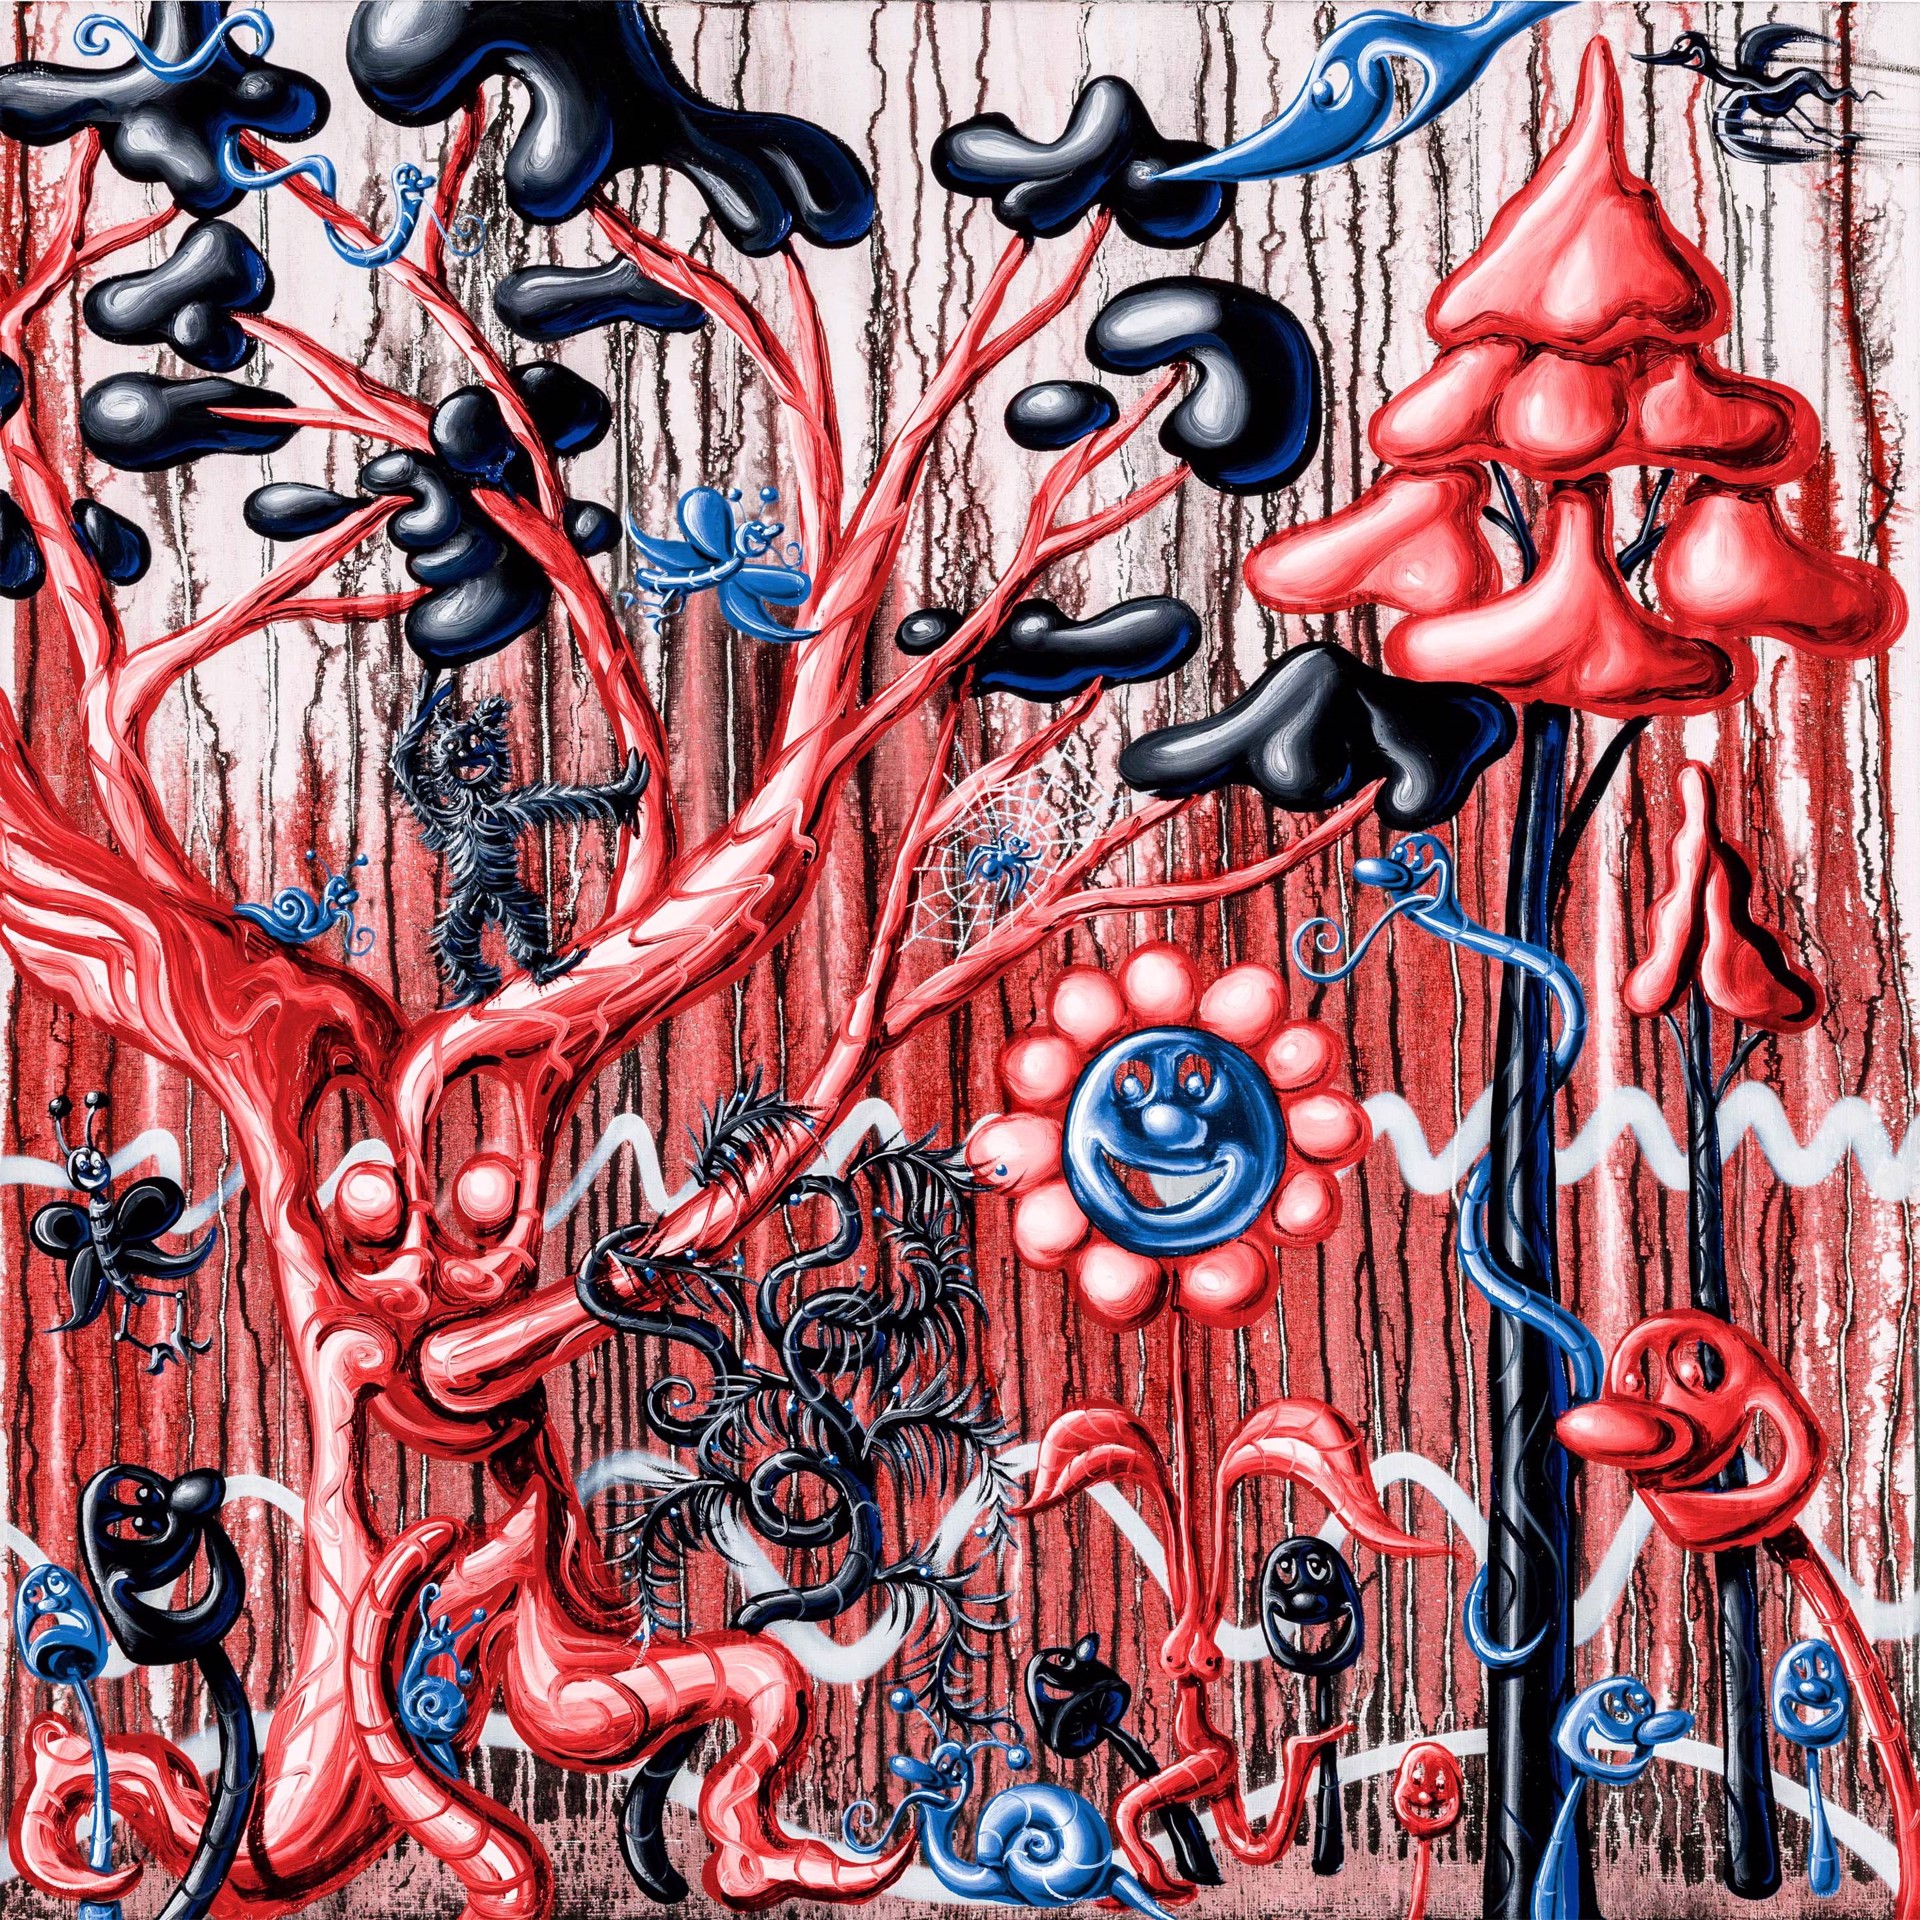 Furungle Red by Kenny Scharf